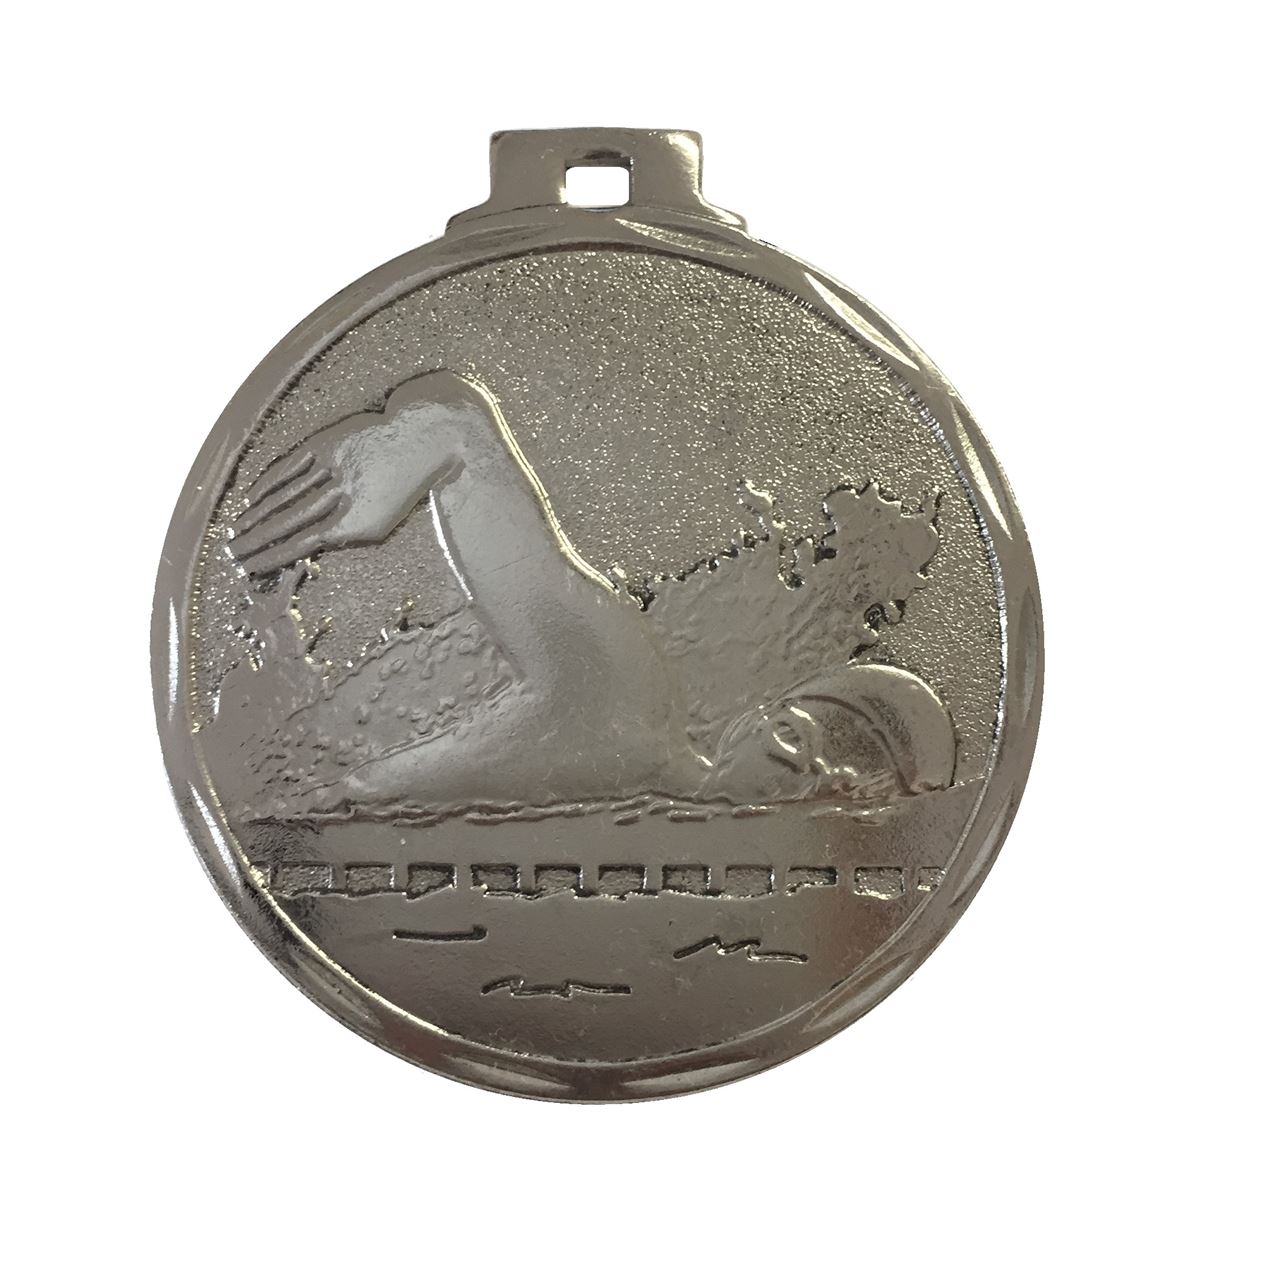 Budget Swimming Medal Silver - 7907